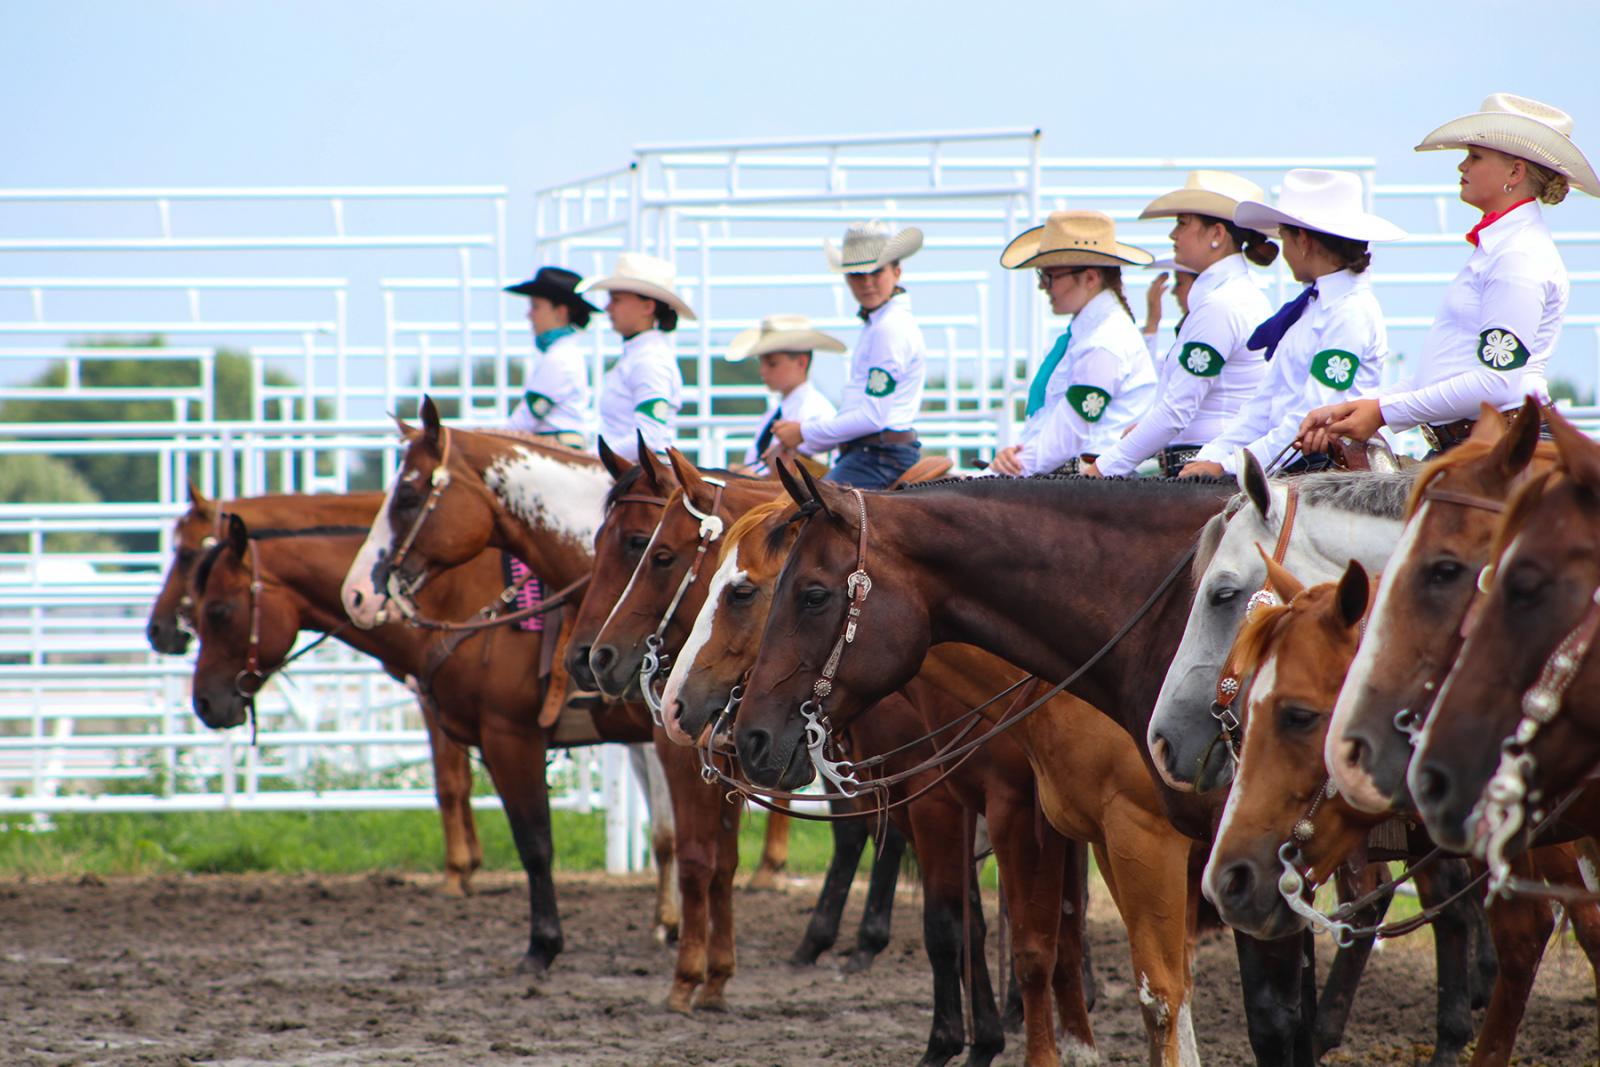 4-H members riding horses in showring